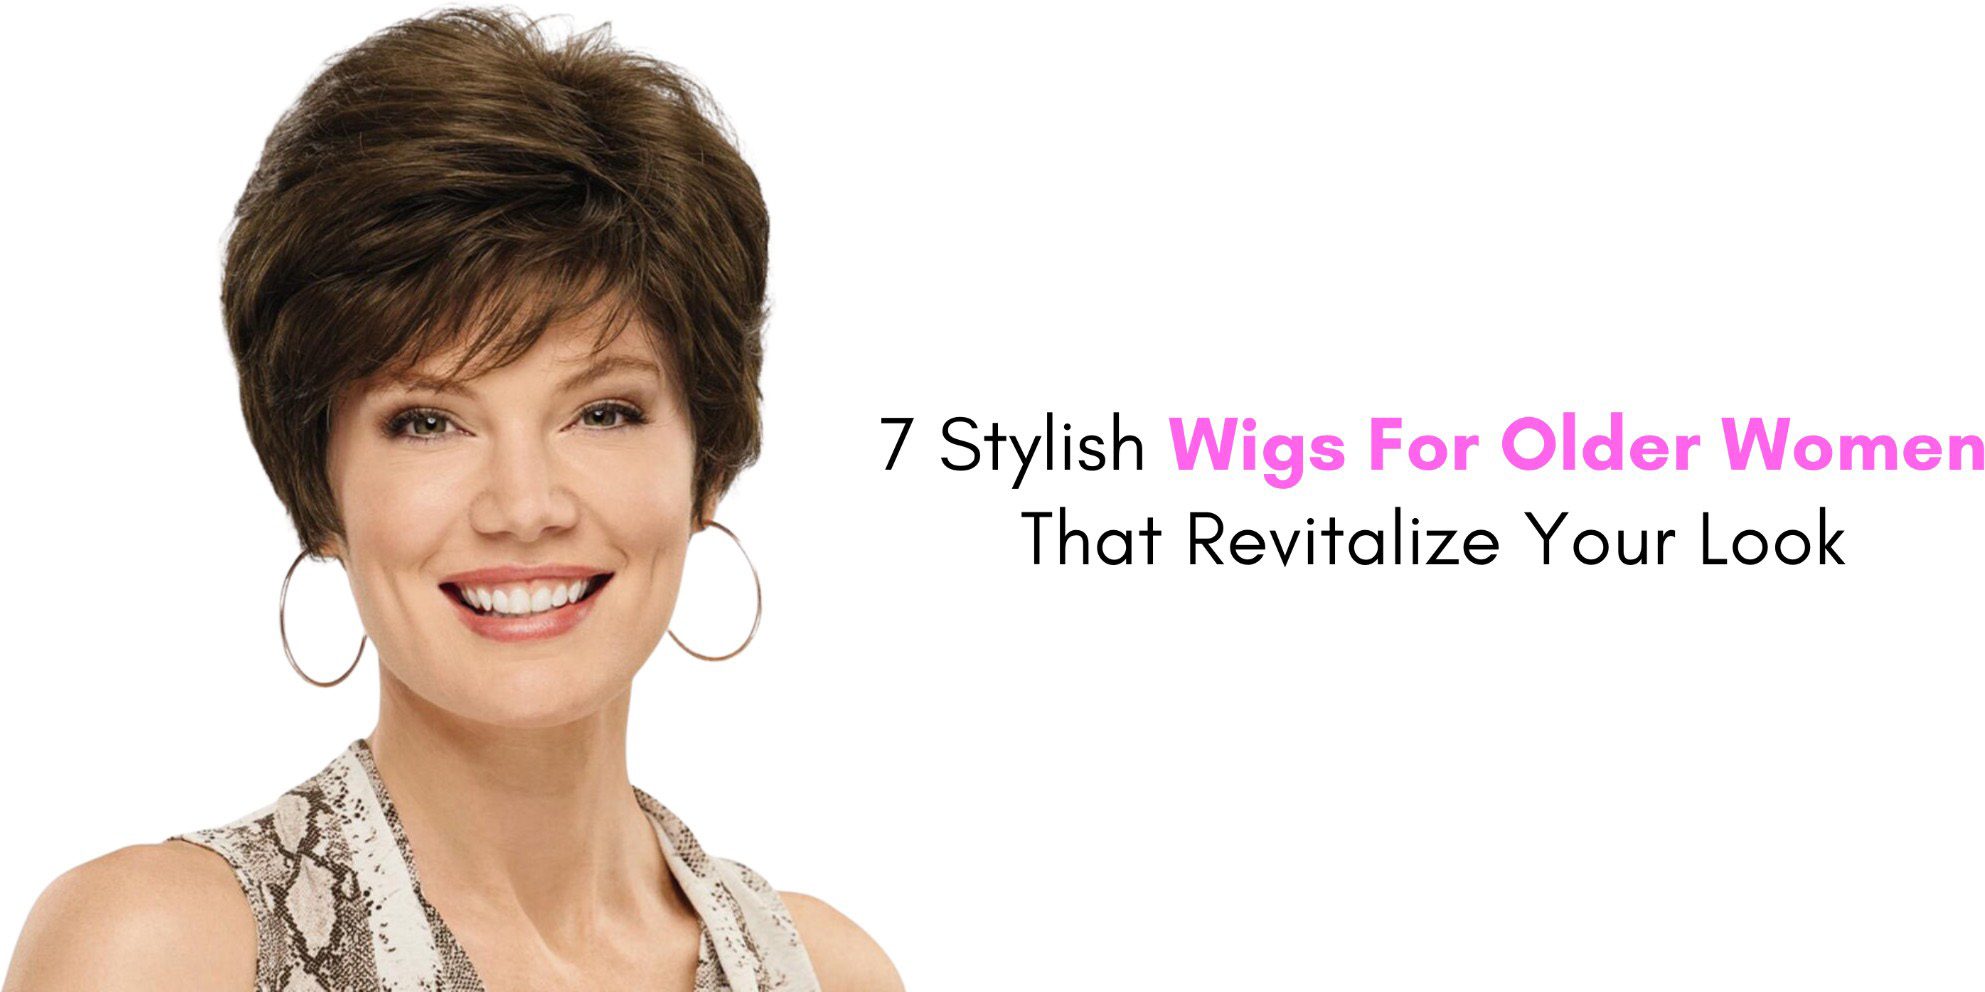 7 Stylish Wigs For Older Women That Revitalize Your Look